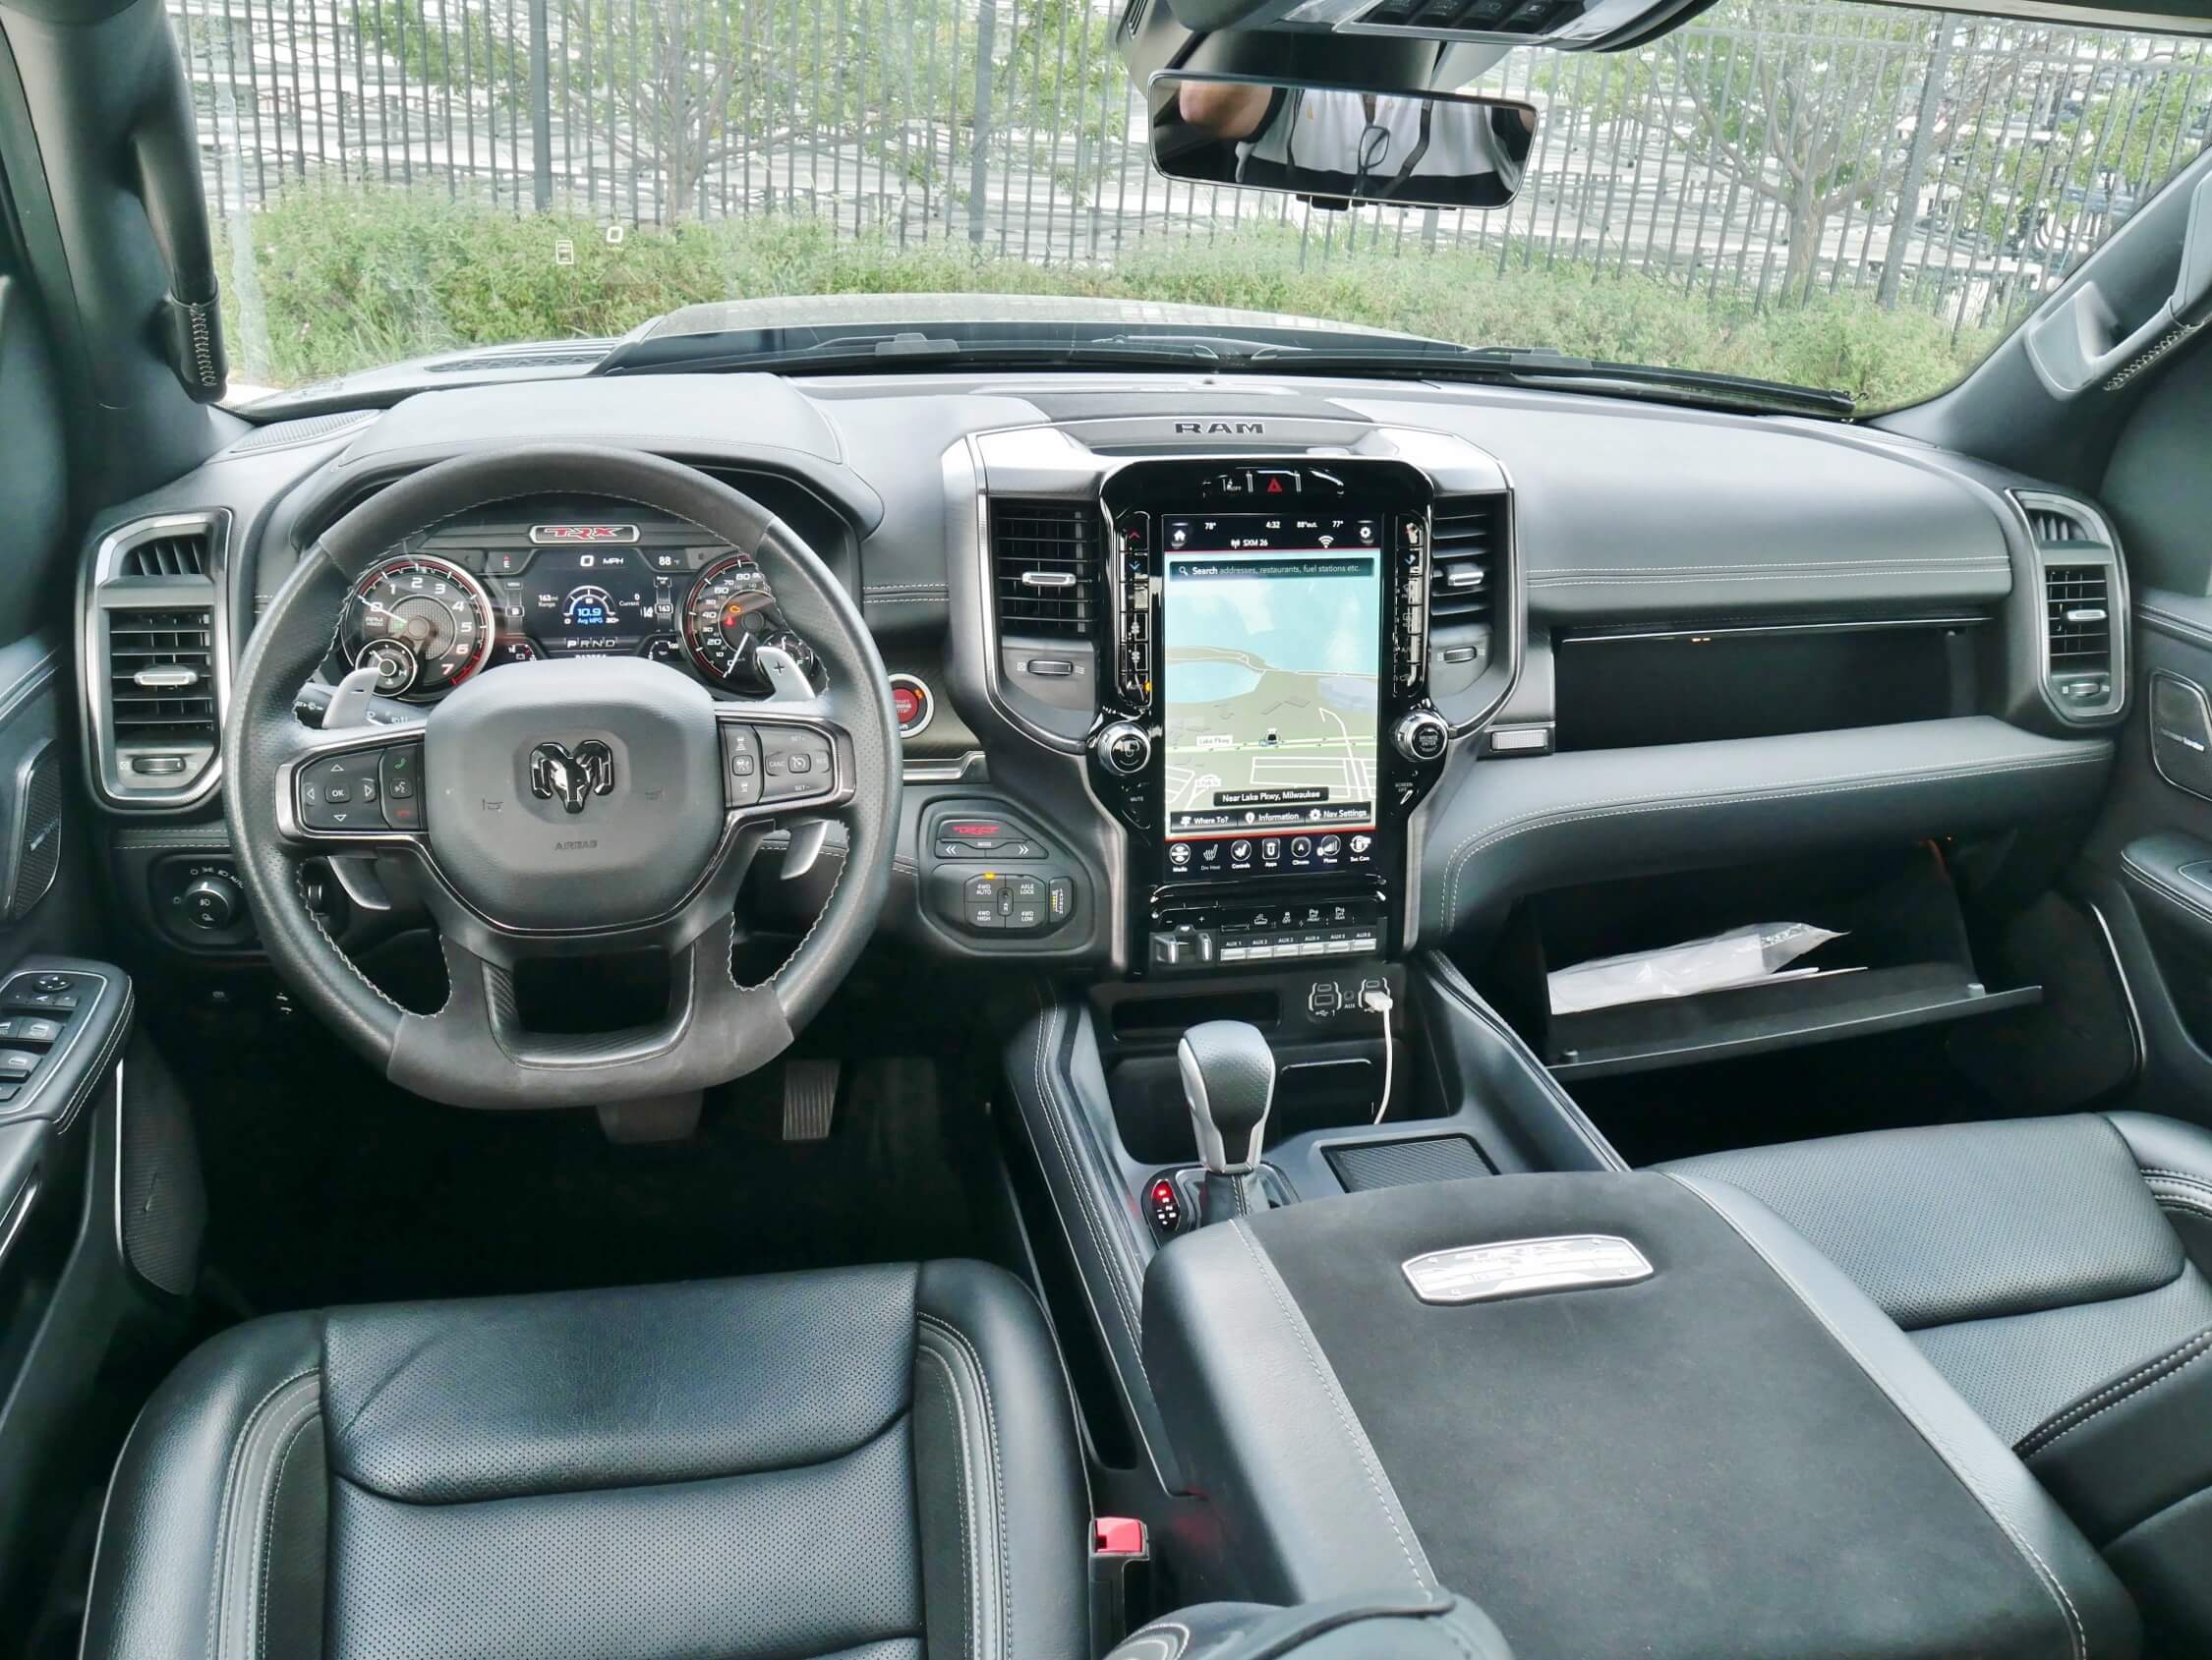 2021 RAM 1500 TRX Crew Cab 4x4: cockpit dominated by glove operable controls, 7.0" twin dial gauge cluster, 12.0" embedded portrait Uconnect 4.0 touch LCD infotainment, upper & lower gloveboxes